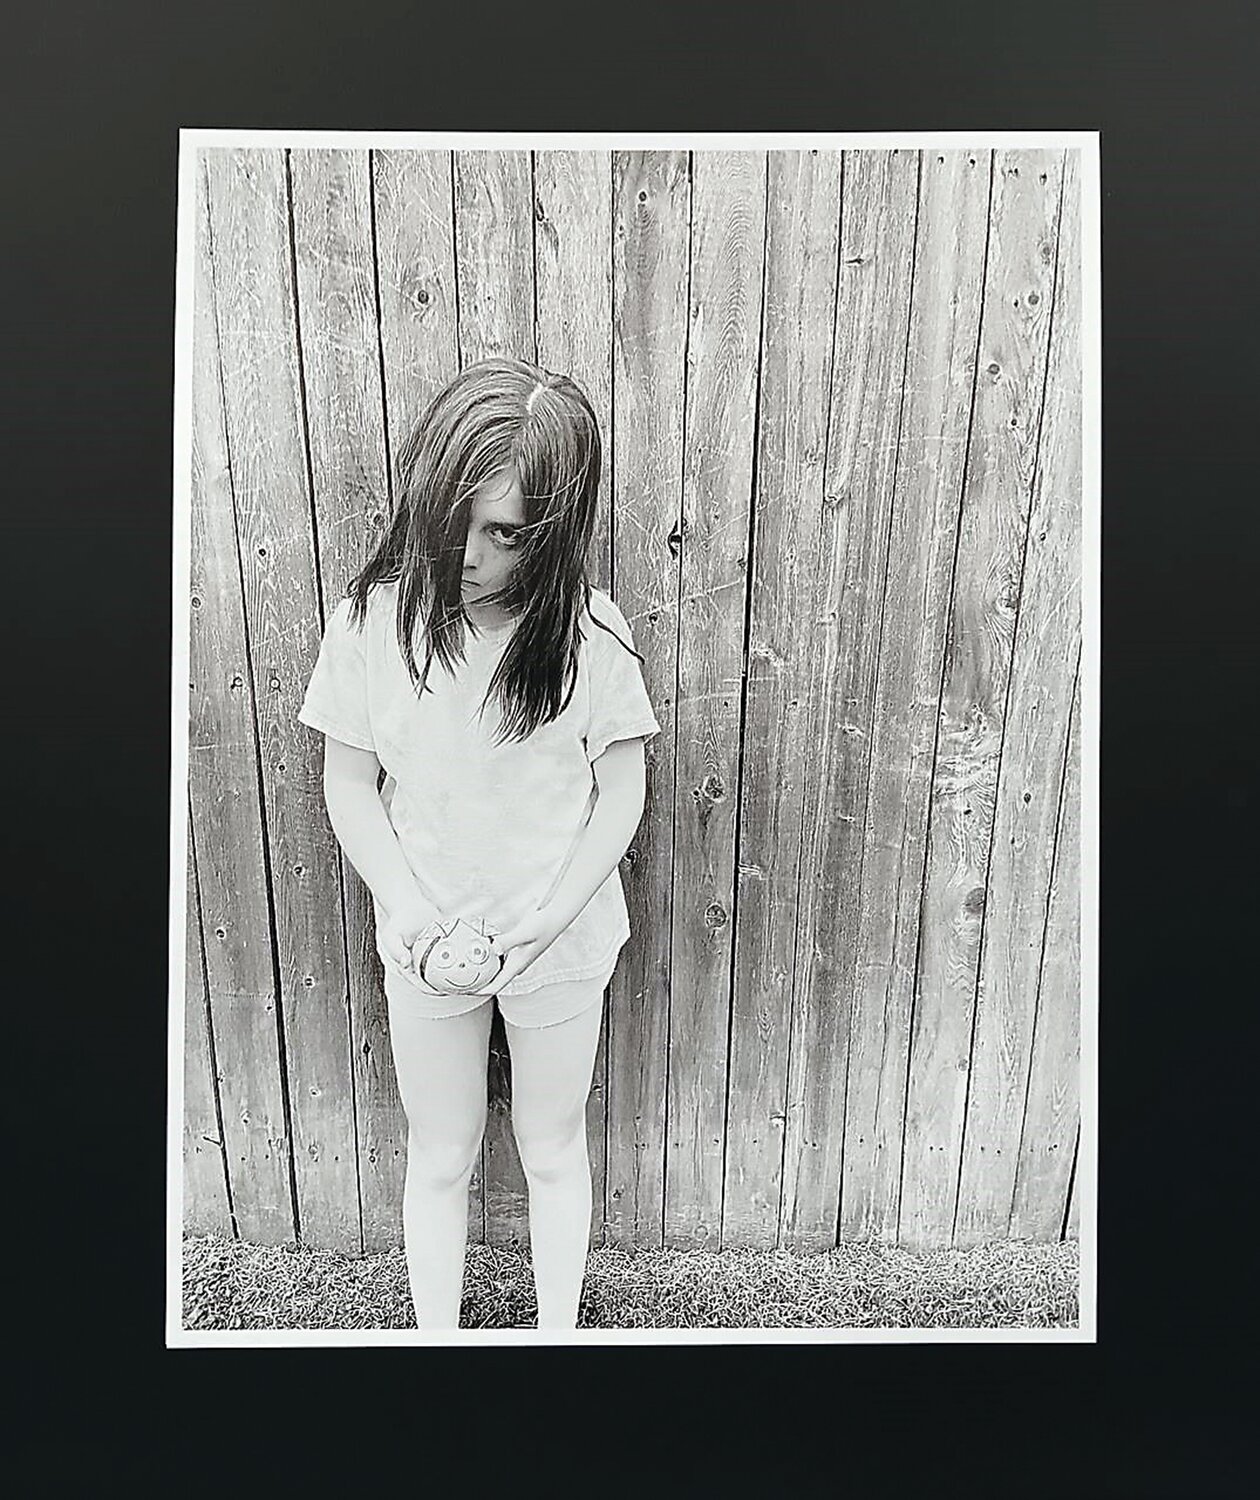 Second Place awardee “Little Sister” by Celia O’Donnell of Truman High School is a digital photograph.